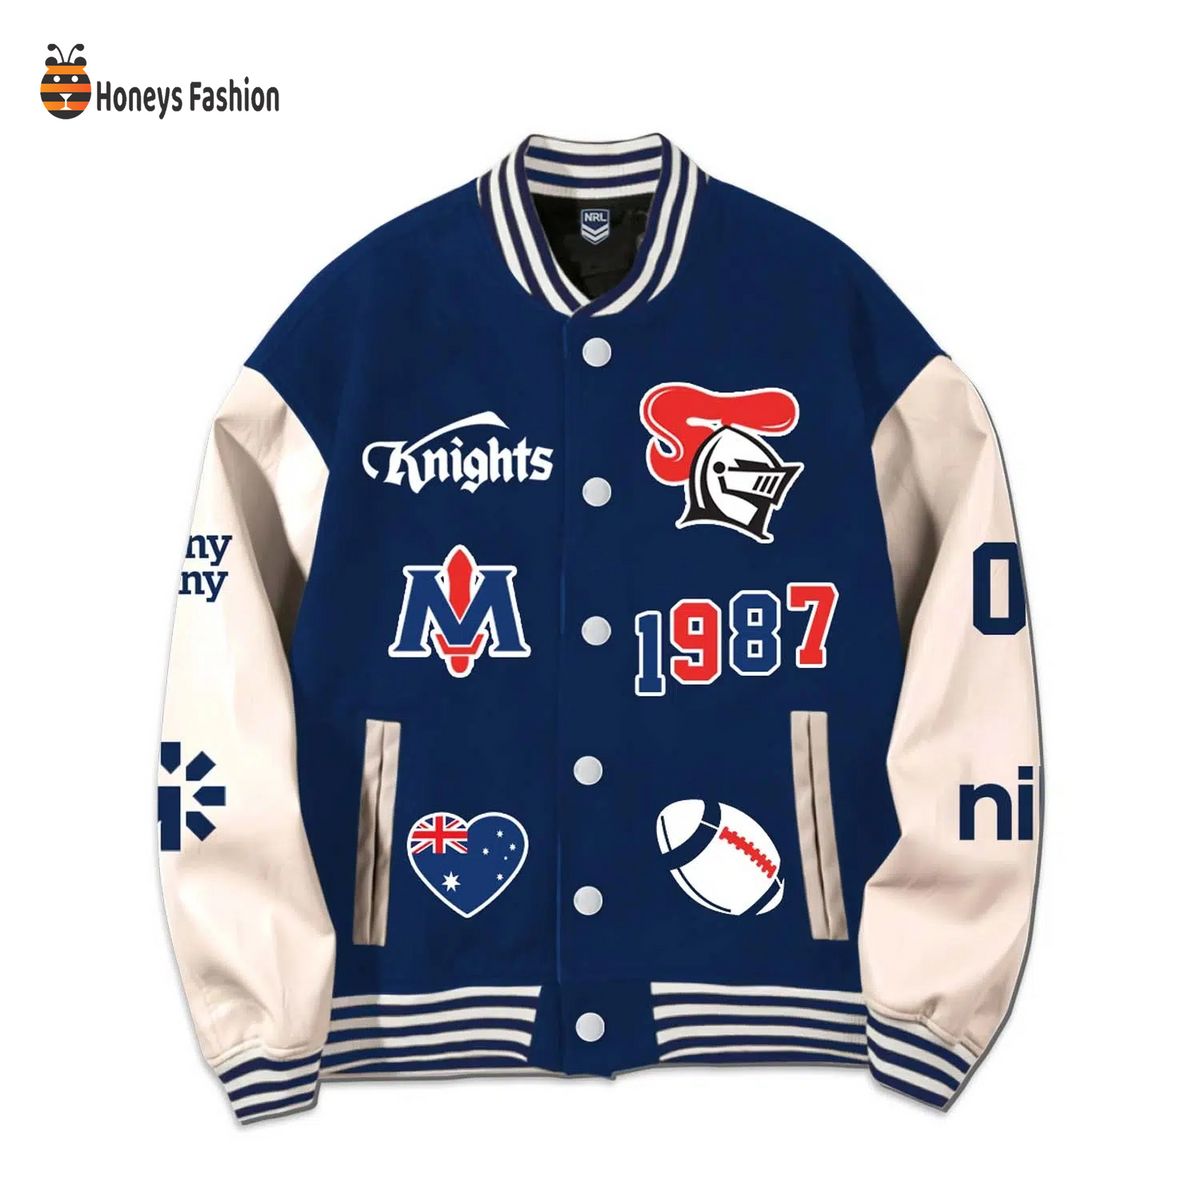 Newcastle Knights Rugby Personalized Jacket